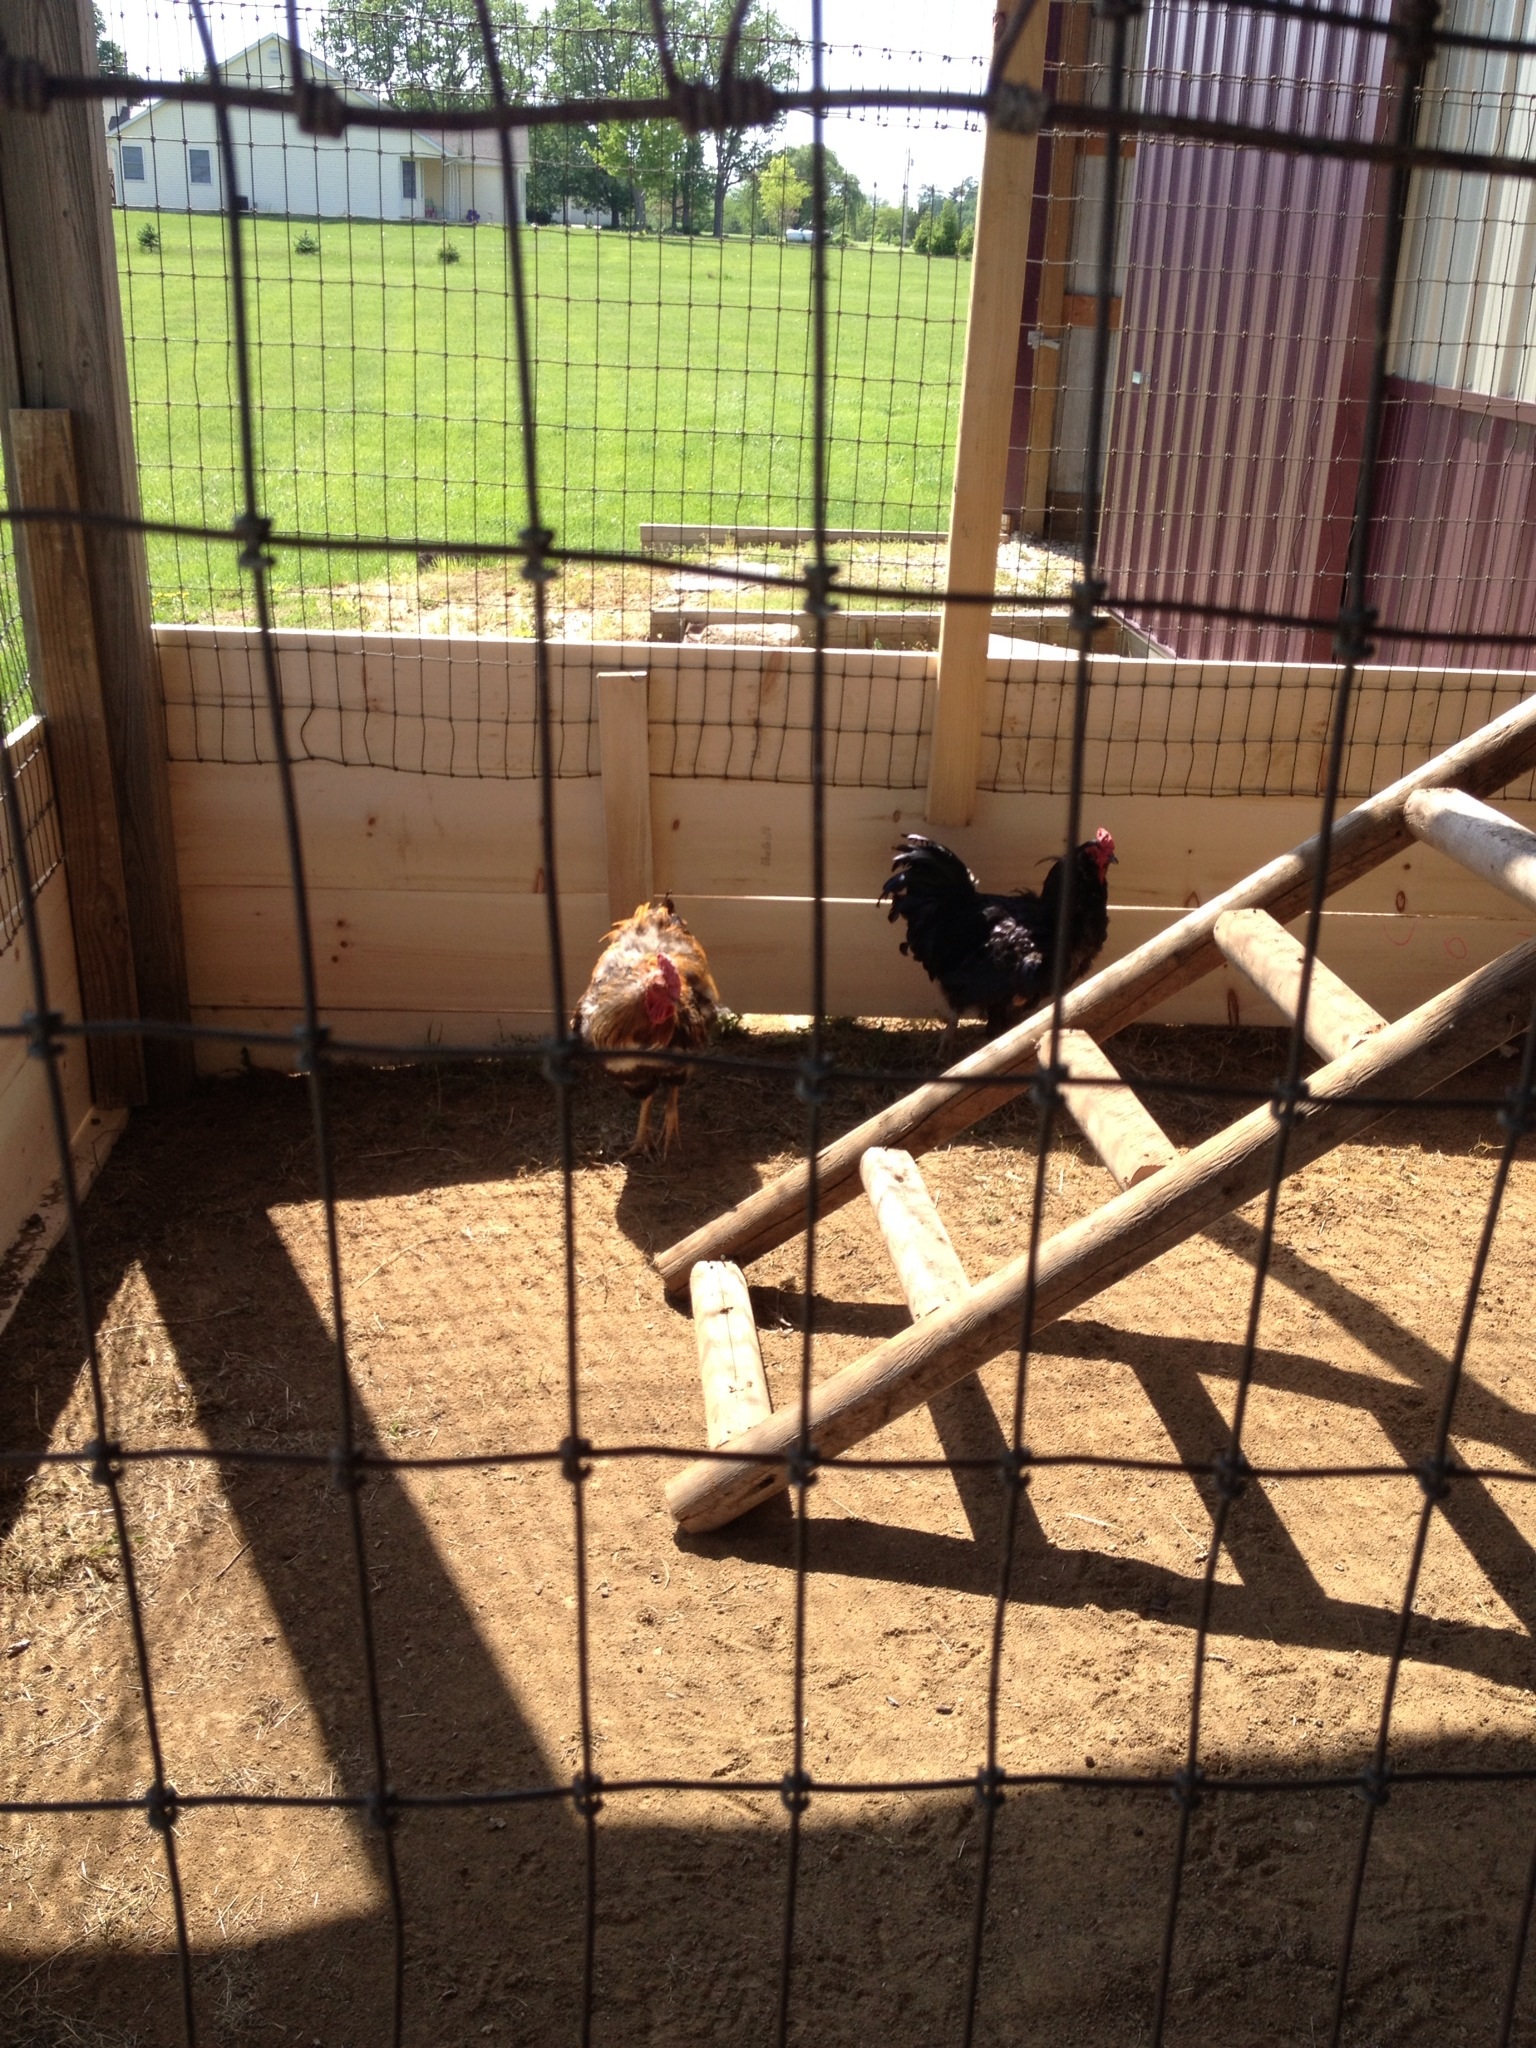 The 2 roosters Starsky and Hutch using the outdoor portion of our coop.